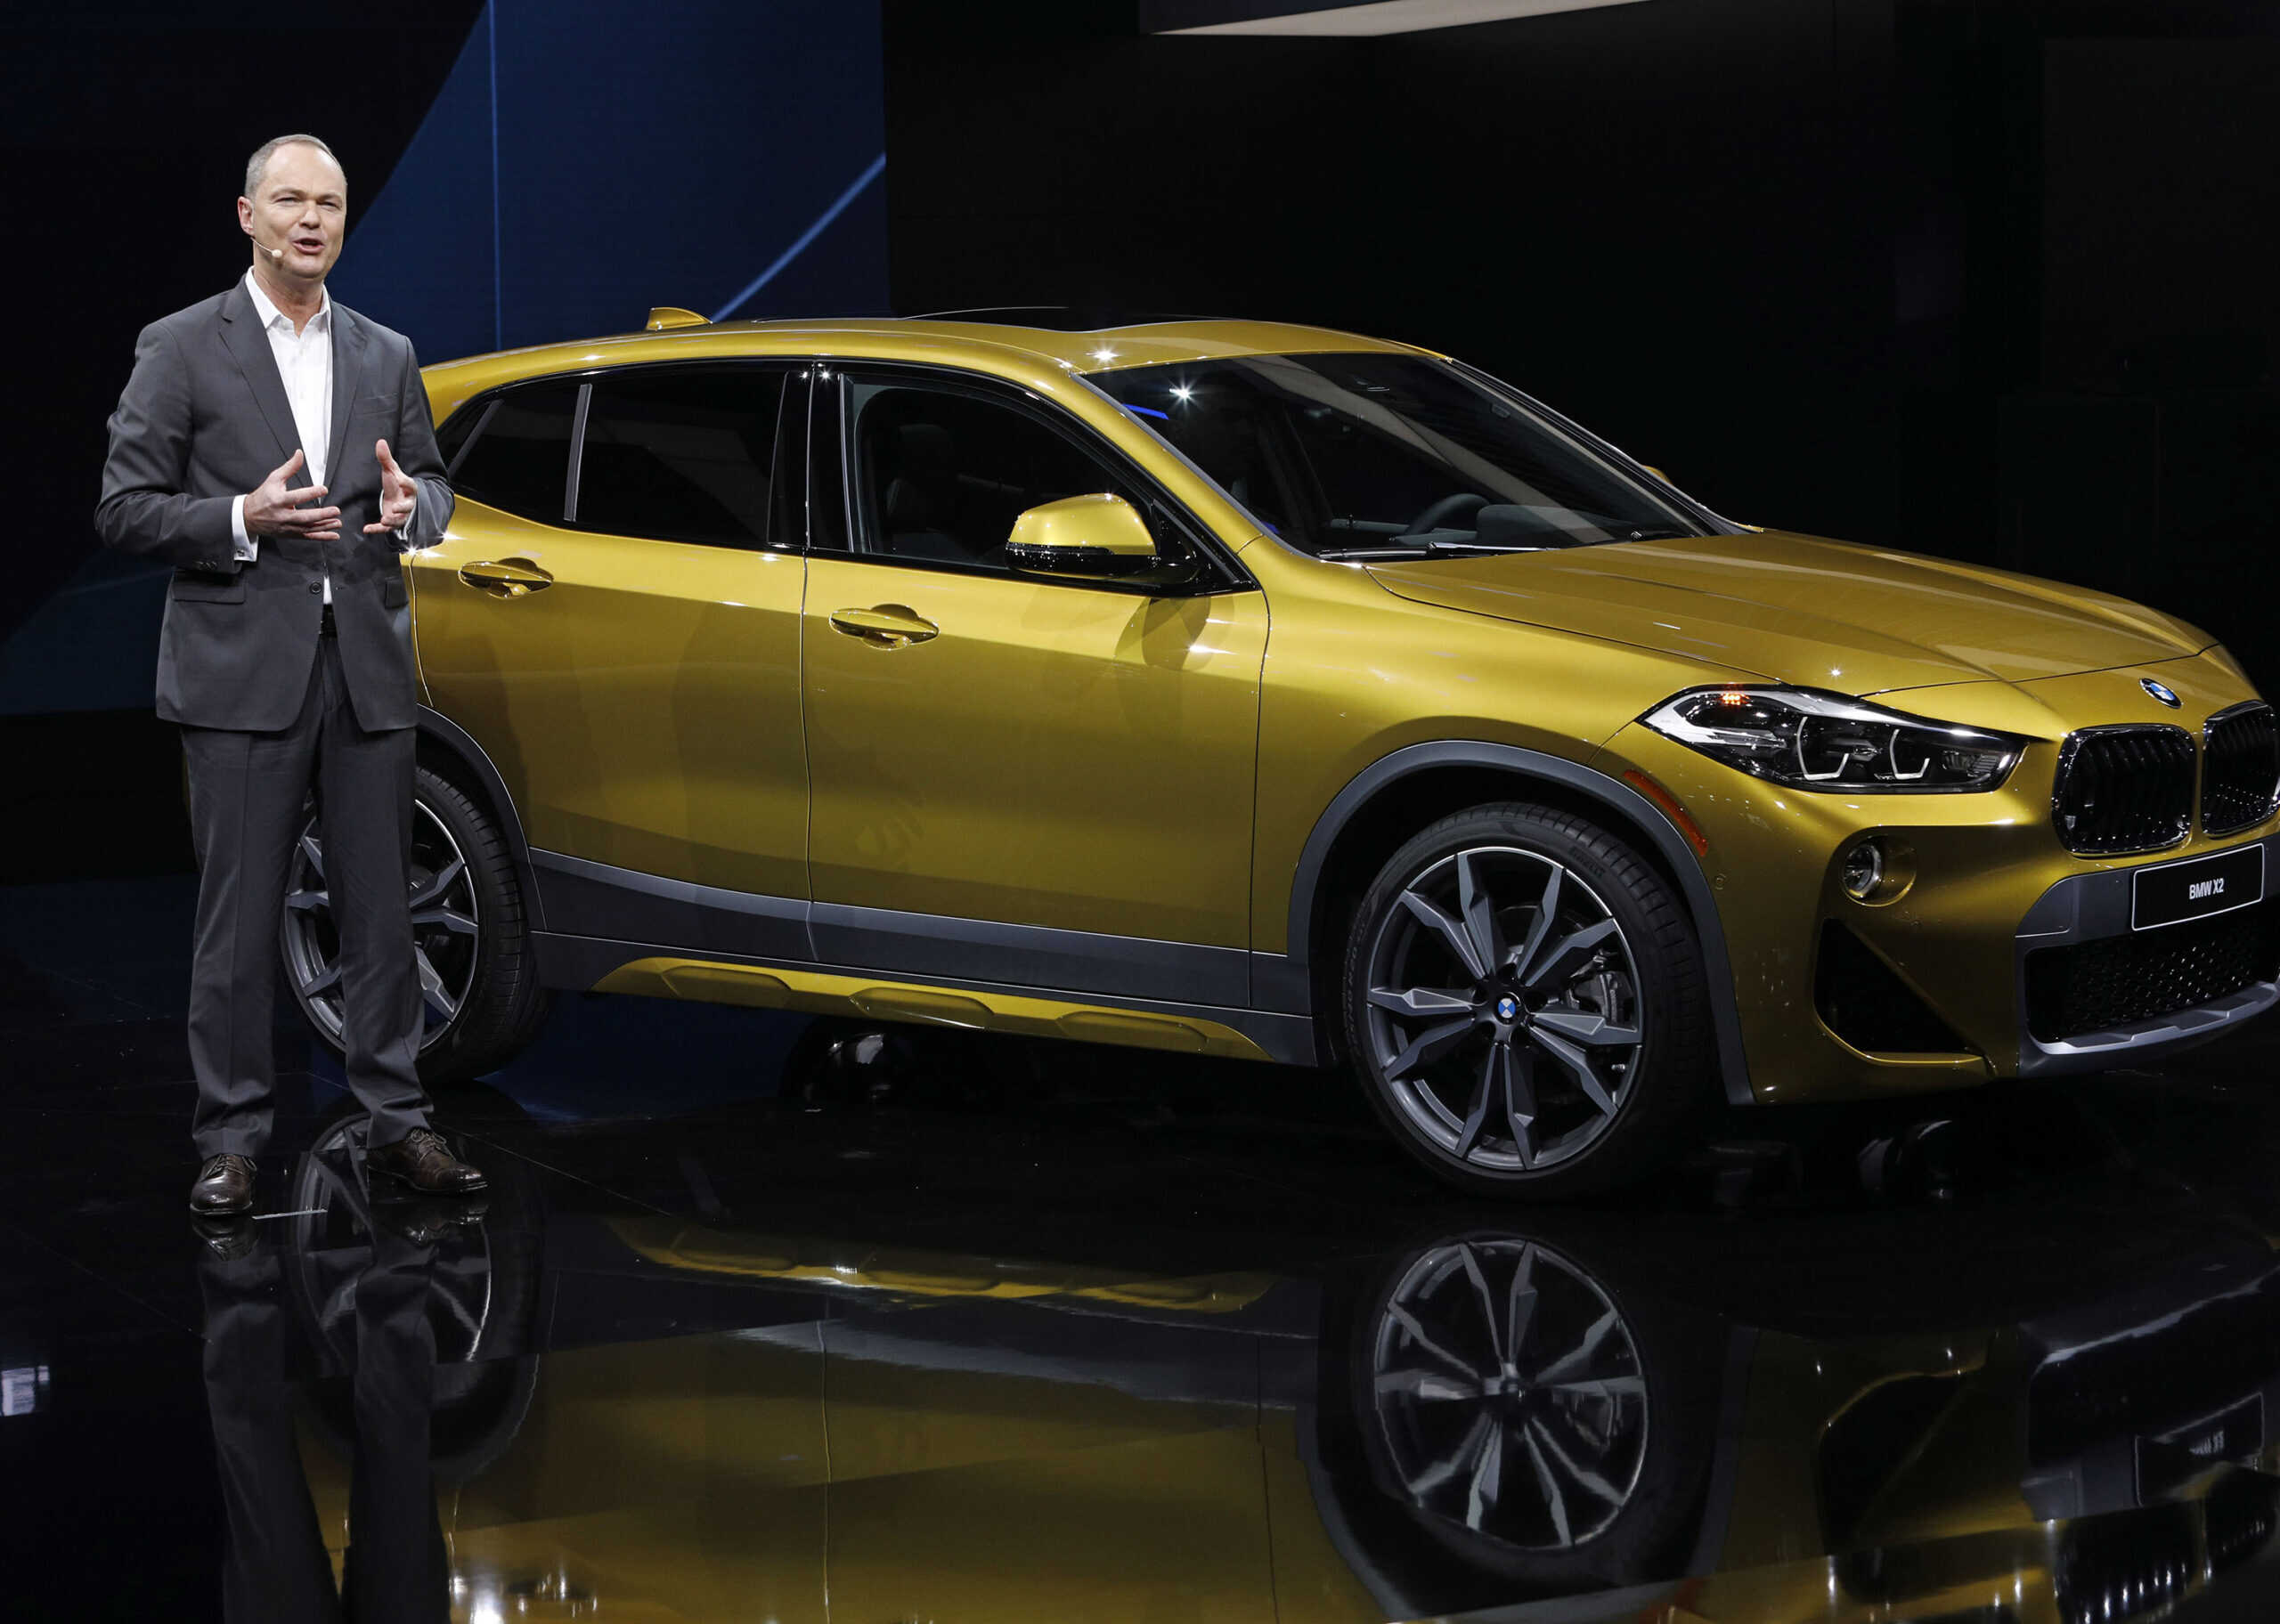 <p>DETROIT, MI-JANUARY 15: Bernhard Kuhnt, President and CEO of BMW North America, introduces the new 2018 BMW X2 at its world debut at the 2018 North American International Auto Show January 15, 2018 in Detroit, Michigan. More than 5,100 journalists from 61 countries attend the NAIAS each year. The show opens to the public January 20th and ends January 28th. (Photo by Bill Pugliano/Getty Images)</p> <p>BMW has a few affordable luxury options on the list, and the X2 is another solid one. It has two engine options (228 or 312 horsepower) and a hybrid system for a little more get-up. This compact SUV is priced against the Volvo XC40 and the Mercedez-Benz GLA. The car has all the creature comforts, plus some great performance, in a relatively compact form factor.</p> <ul> <li><strong>Price:</strong> $36,600-$56,950</li> <li><strong>Body Style:</strong>SUV</li> <li><strong>Power-Type:</strong>Gas/Hybrid</li> </ul> <p>Agree with this? Hit the Thumbs Up button above. Disagree? Let us know in the comments with what you'd change.</p>